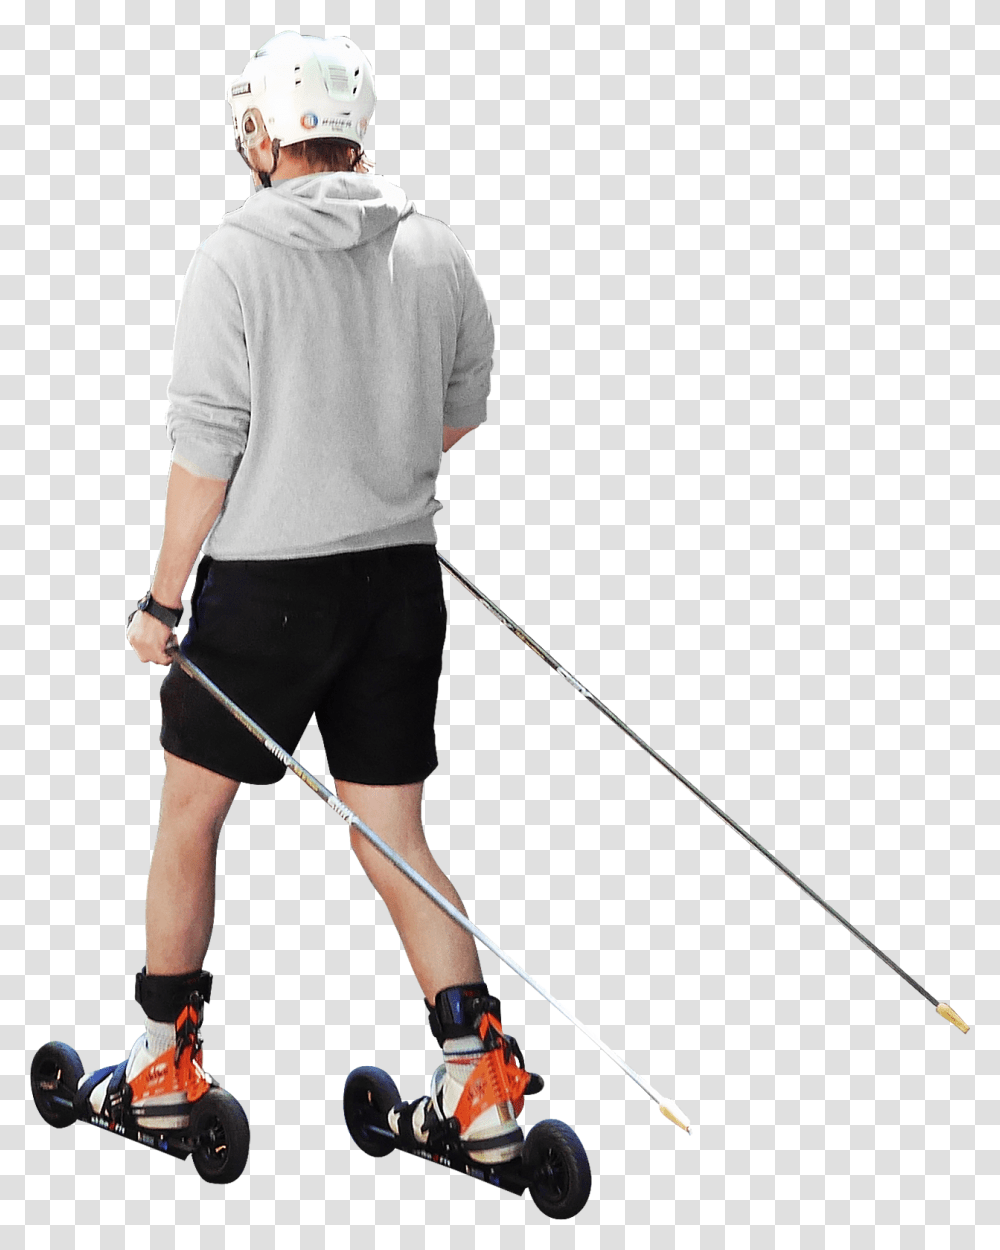 I Didnt Know That Terrain Roller Skis Existed Until Man On Rollerblades, Person, Helmet, People Transparent Png